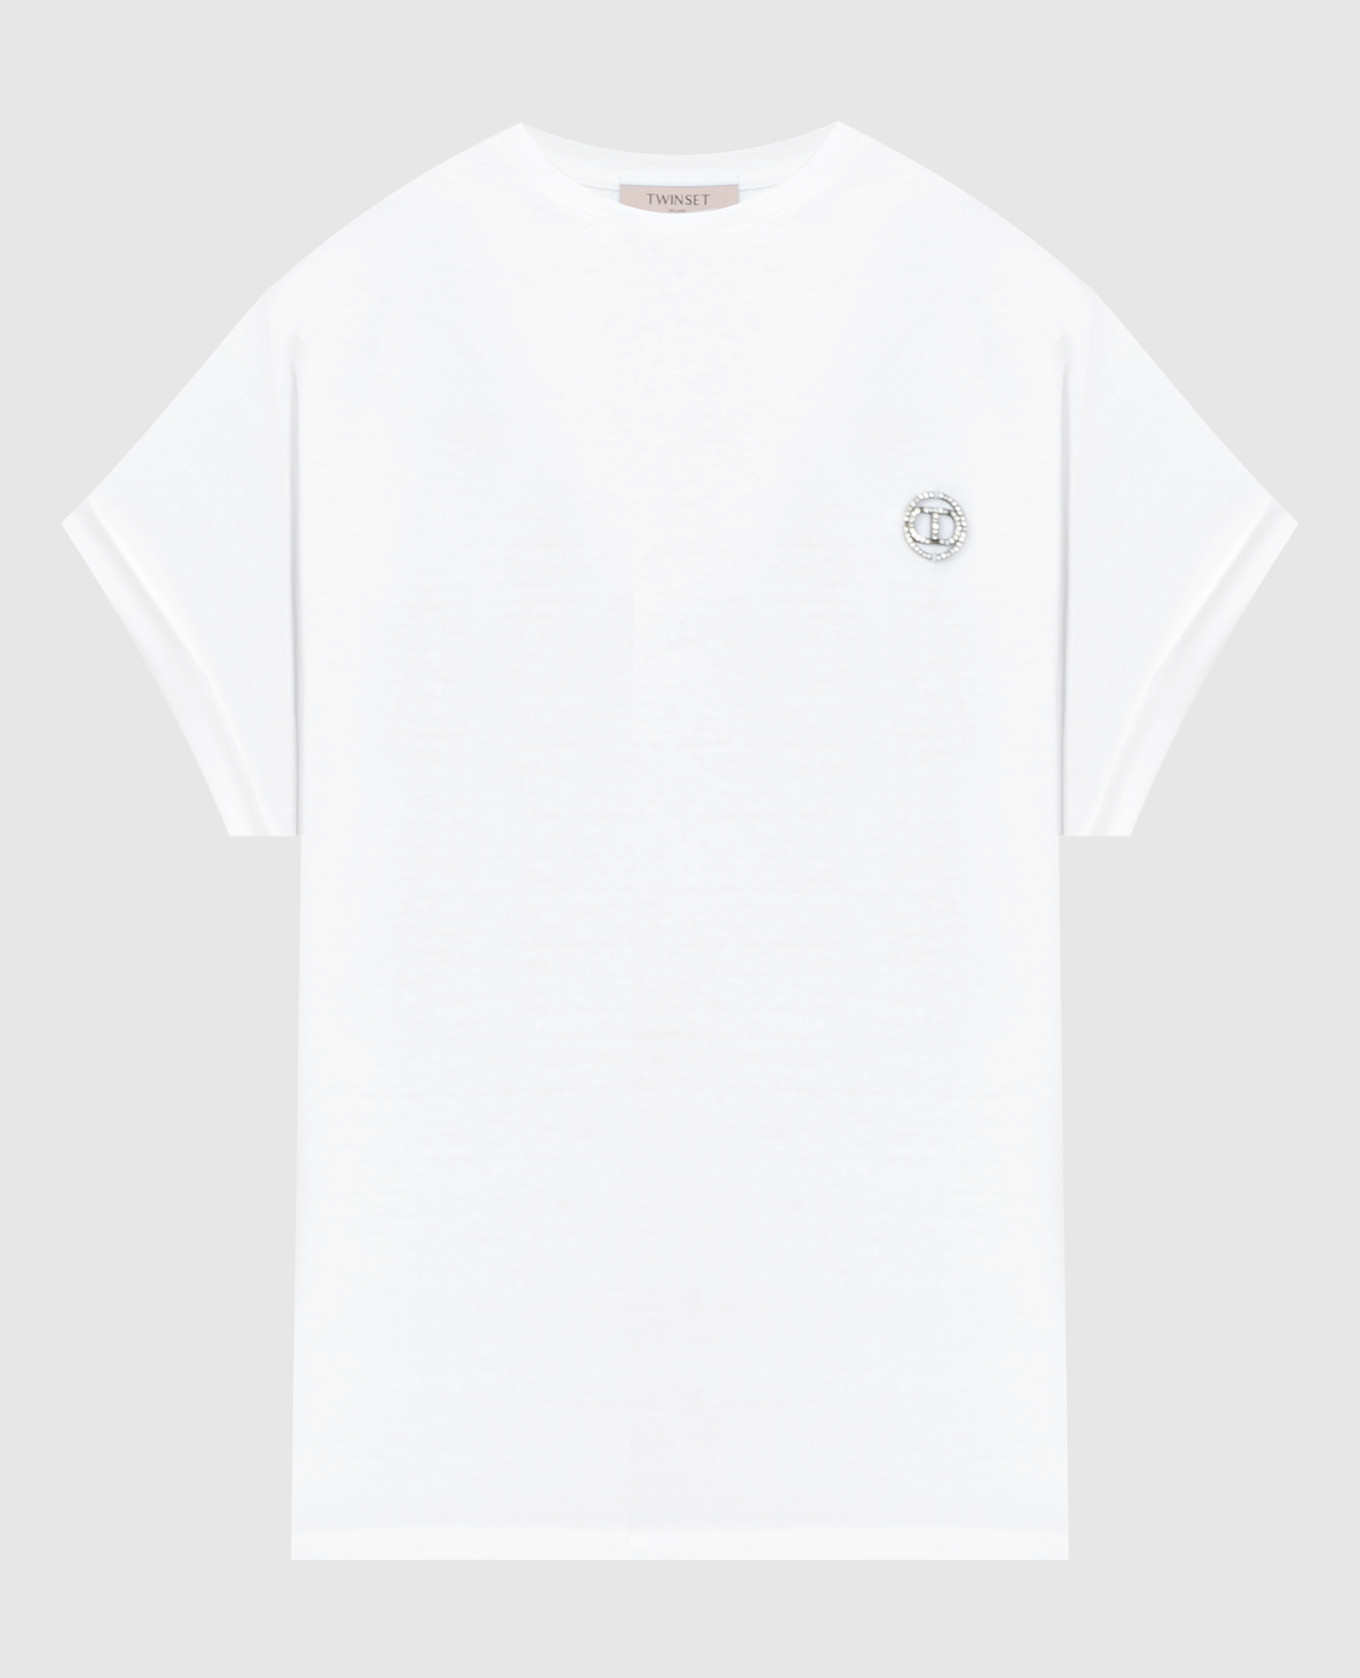 White t-shirt with metallic logo and crystals